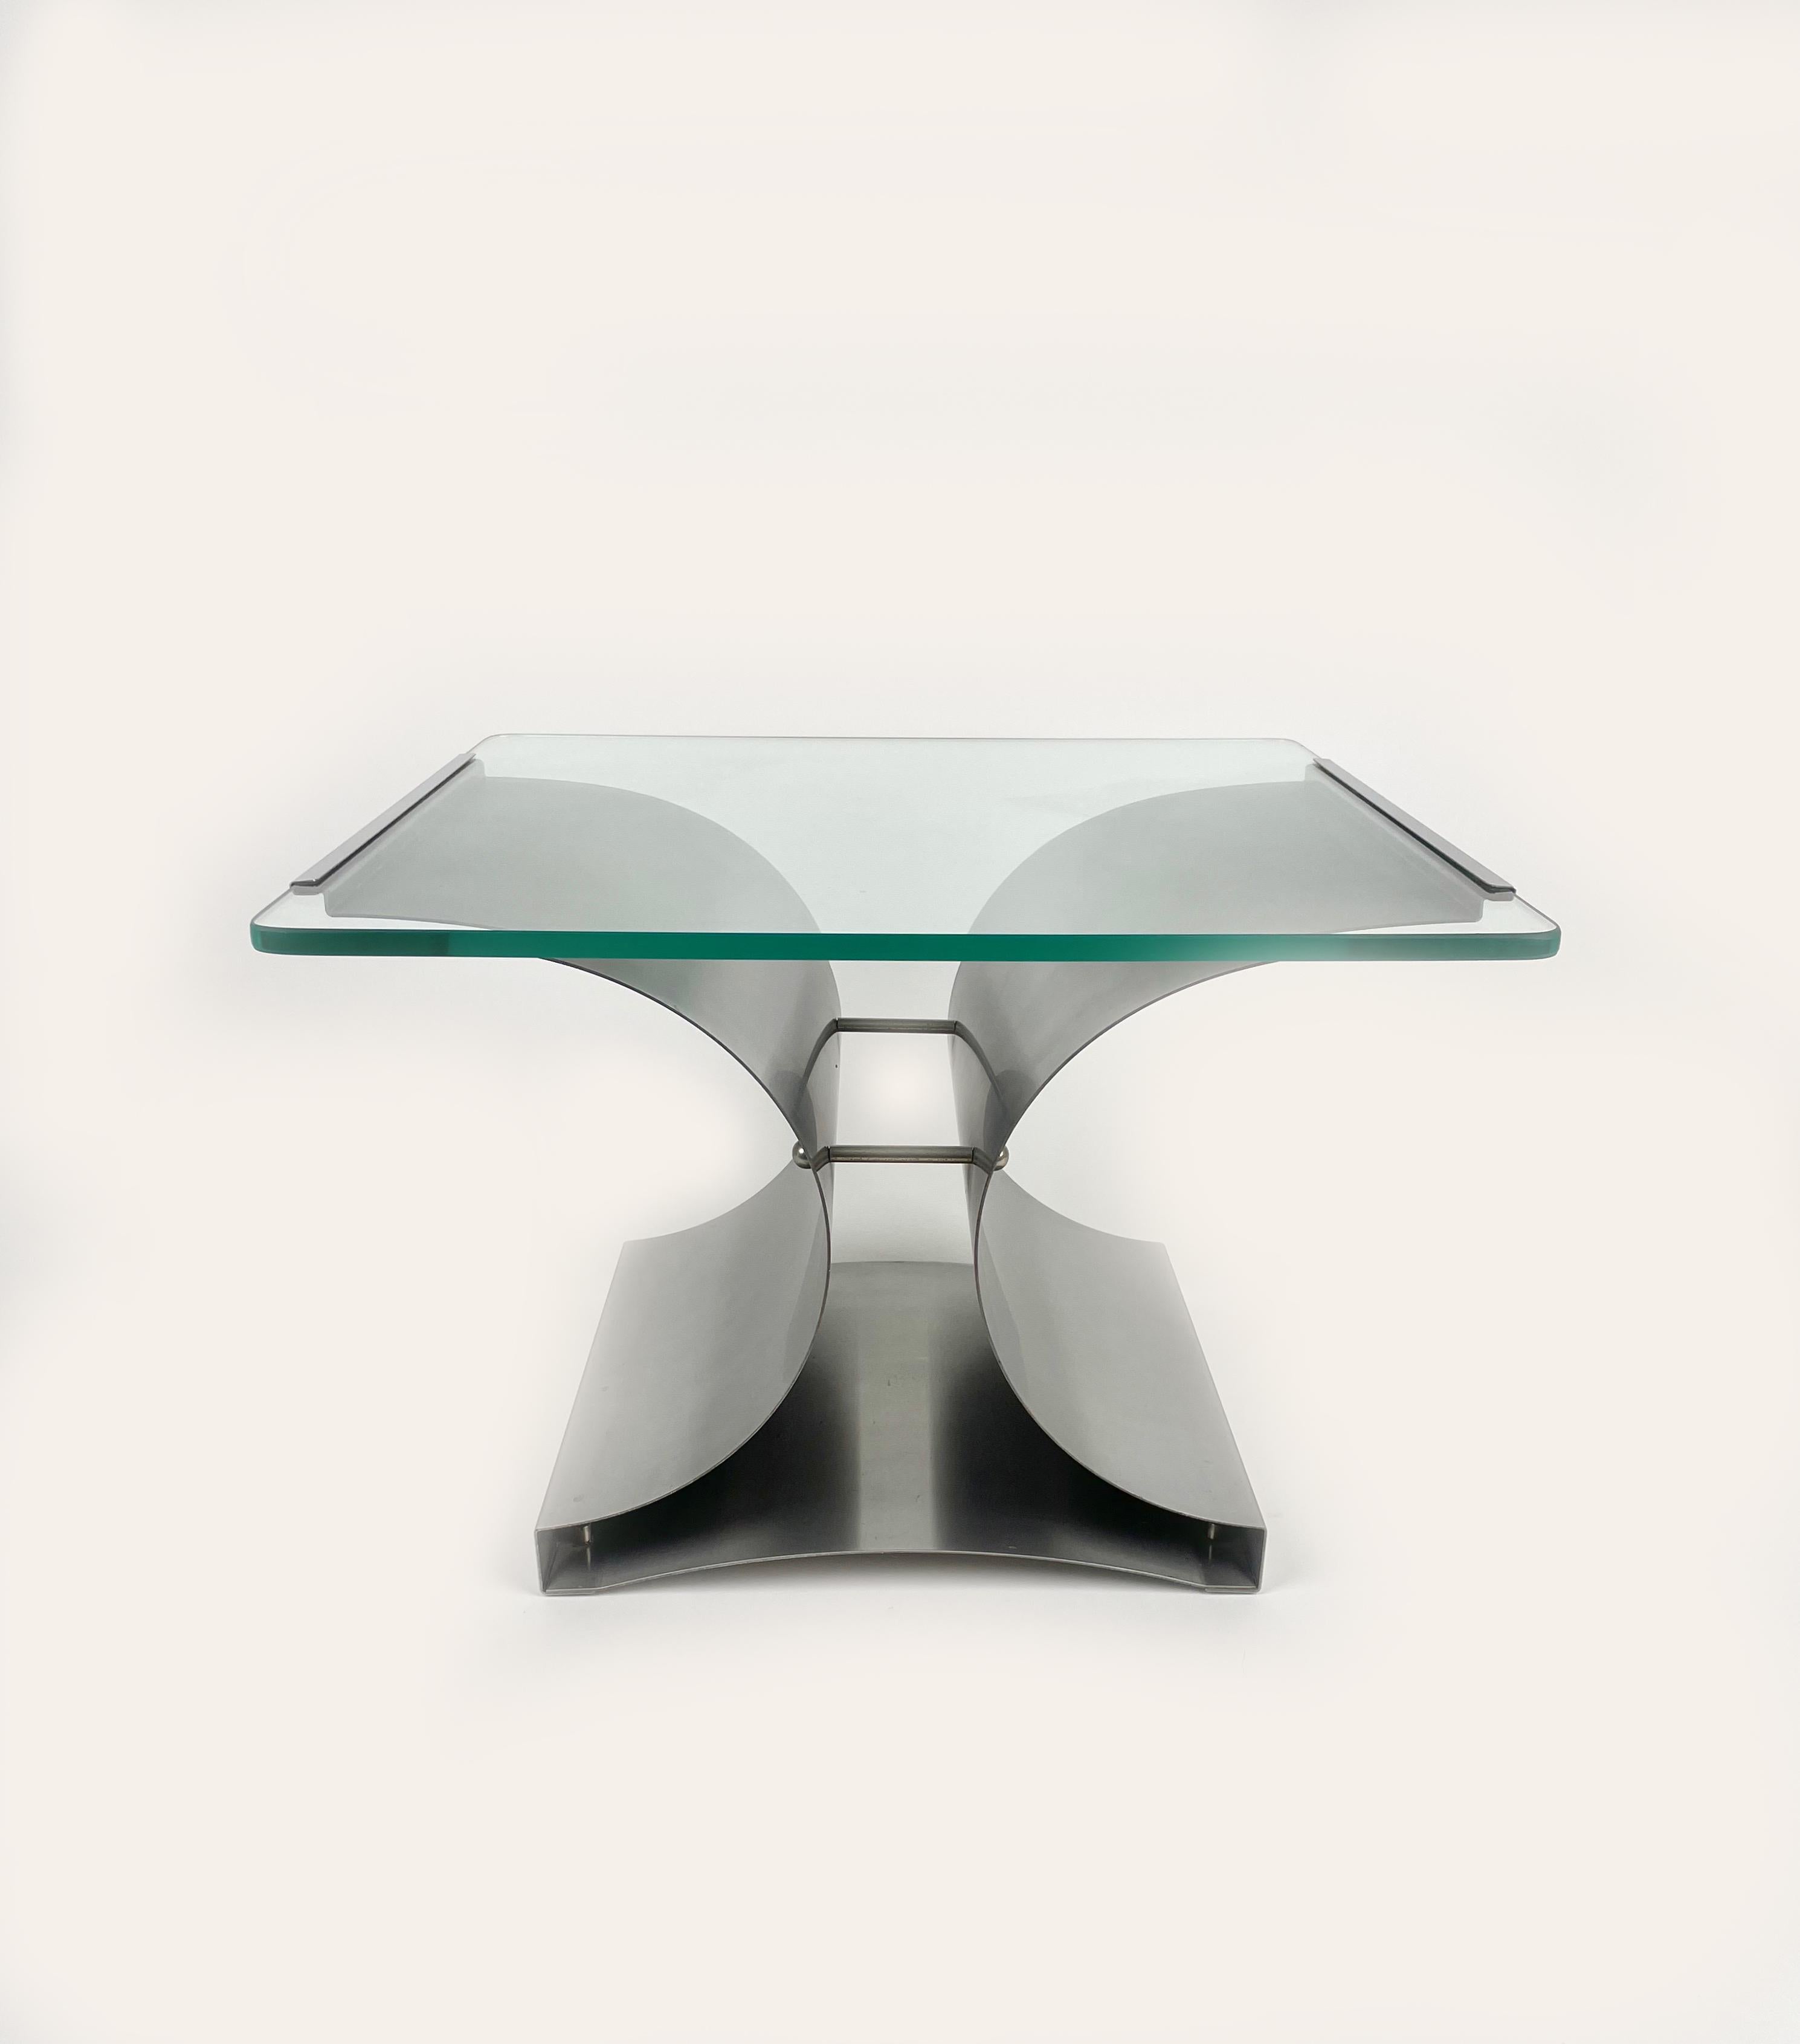 Midcentury squared coffee table / side table in curved brushed steel and glass by Francois Monnet.

Made in France in the 1970s.
  